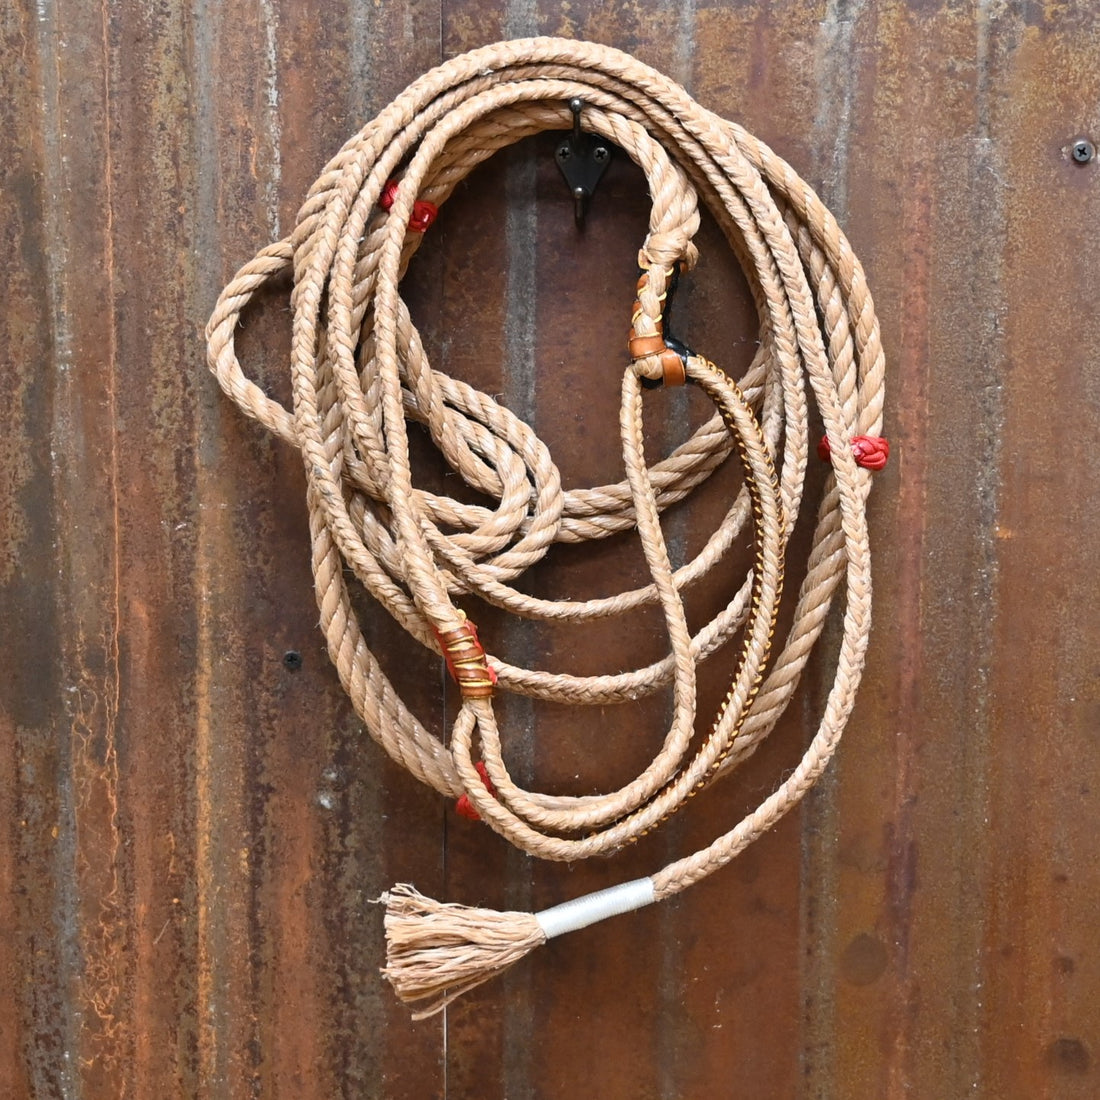 Barstow Pro Rodeo Standard 9 Bull Rope view of rope